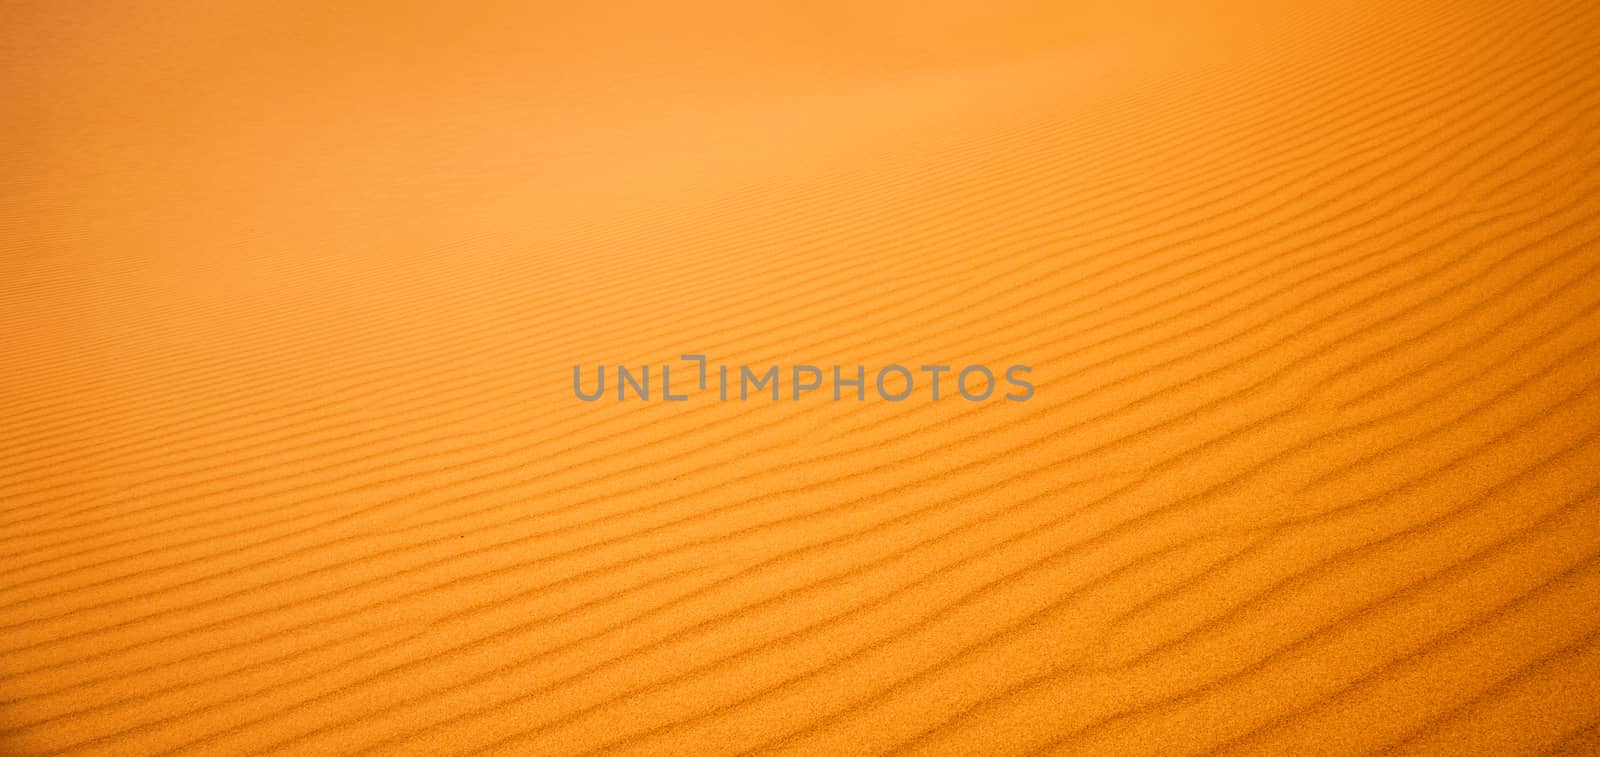 close-up on sands of the desert